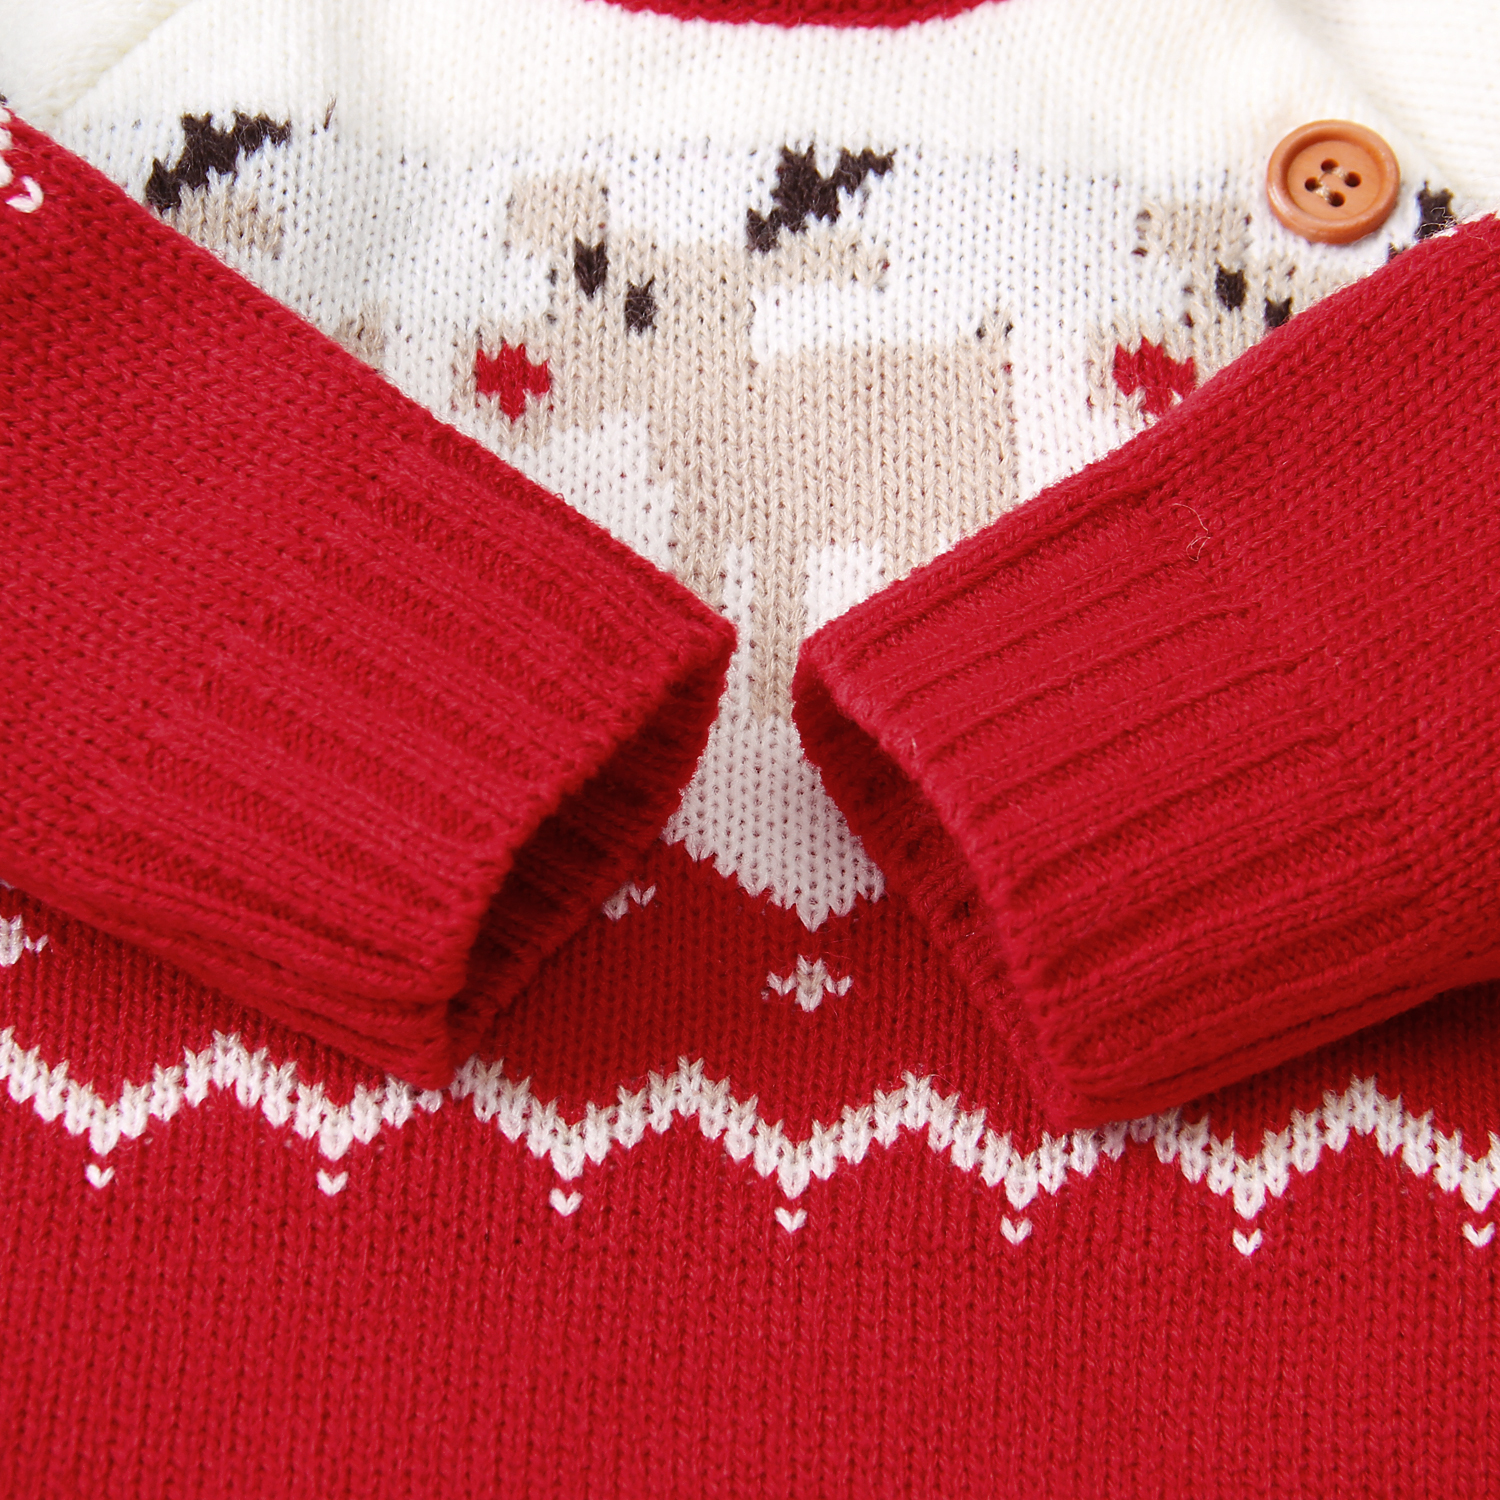 2020 New Winter Christmas 0-18M Newborn Baby Boy Girl Elk Pattern Long Sleeve Sweater Toddler Xmas Knitted Outfit Clothes